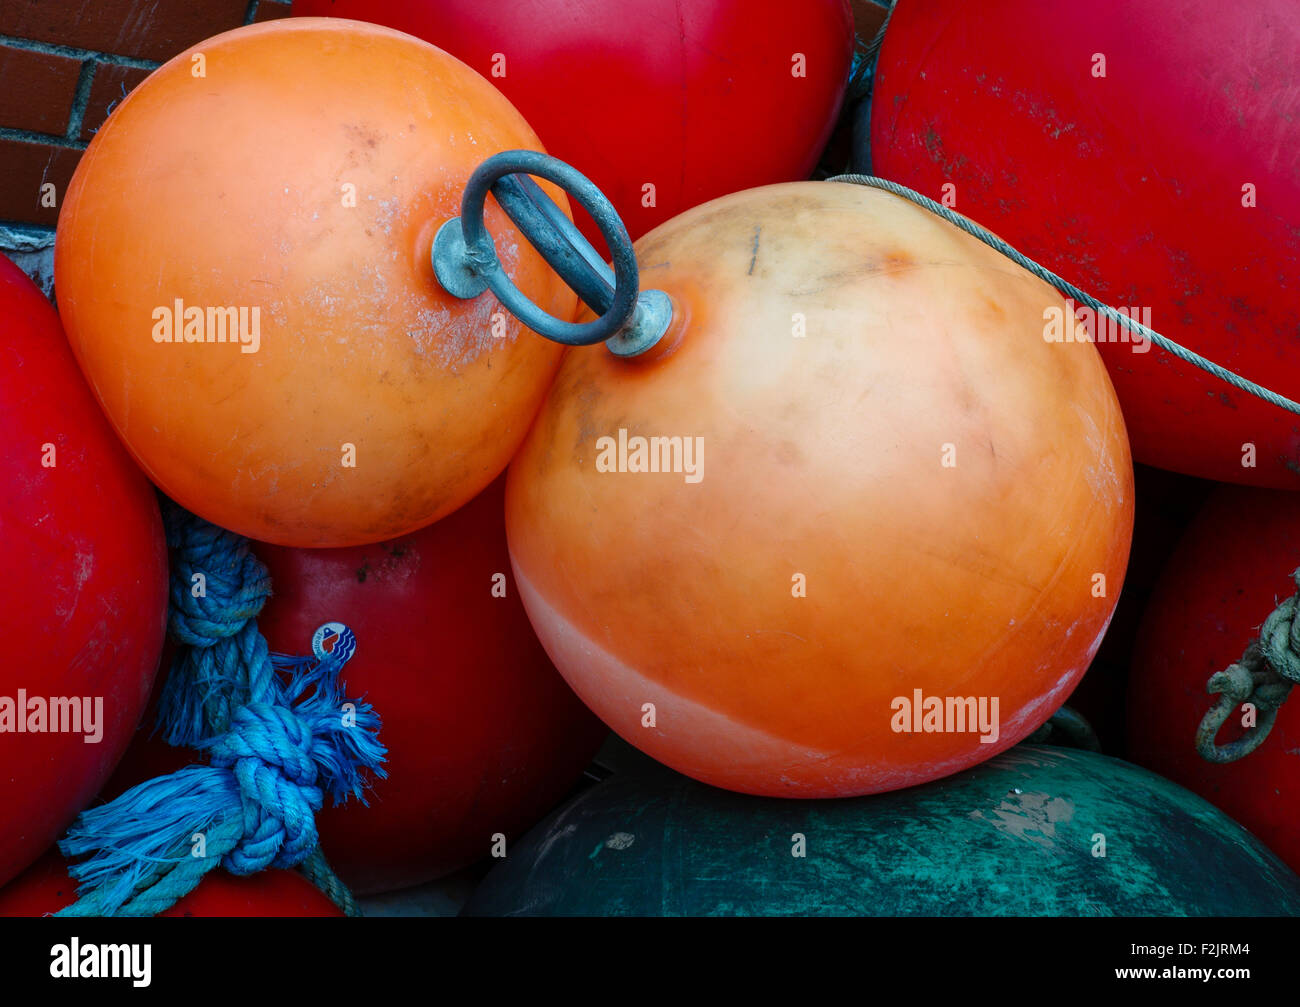 Pair of orange floats in a pile of red floats Stock Photo